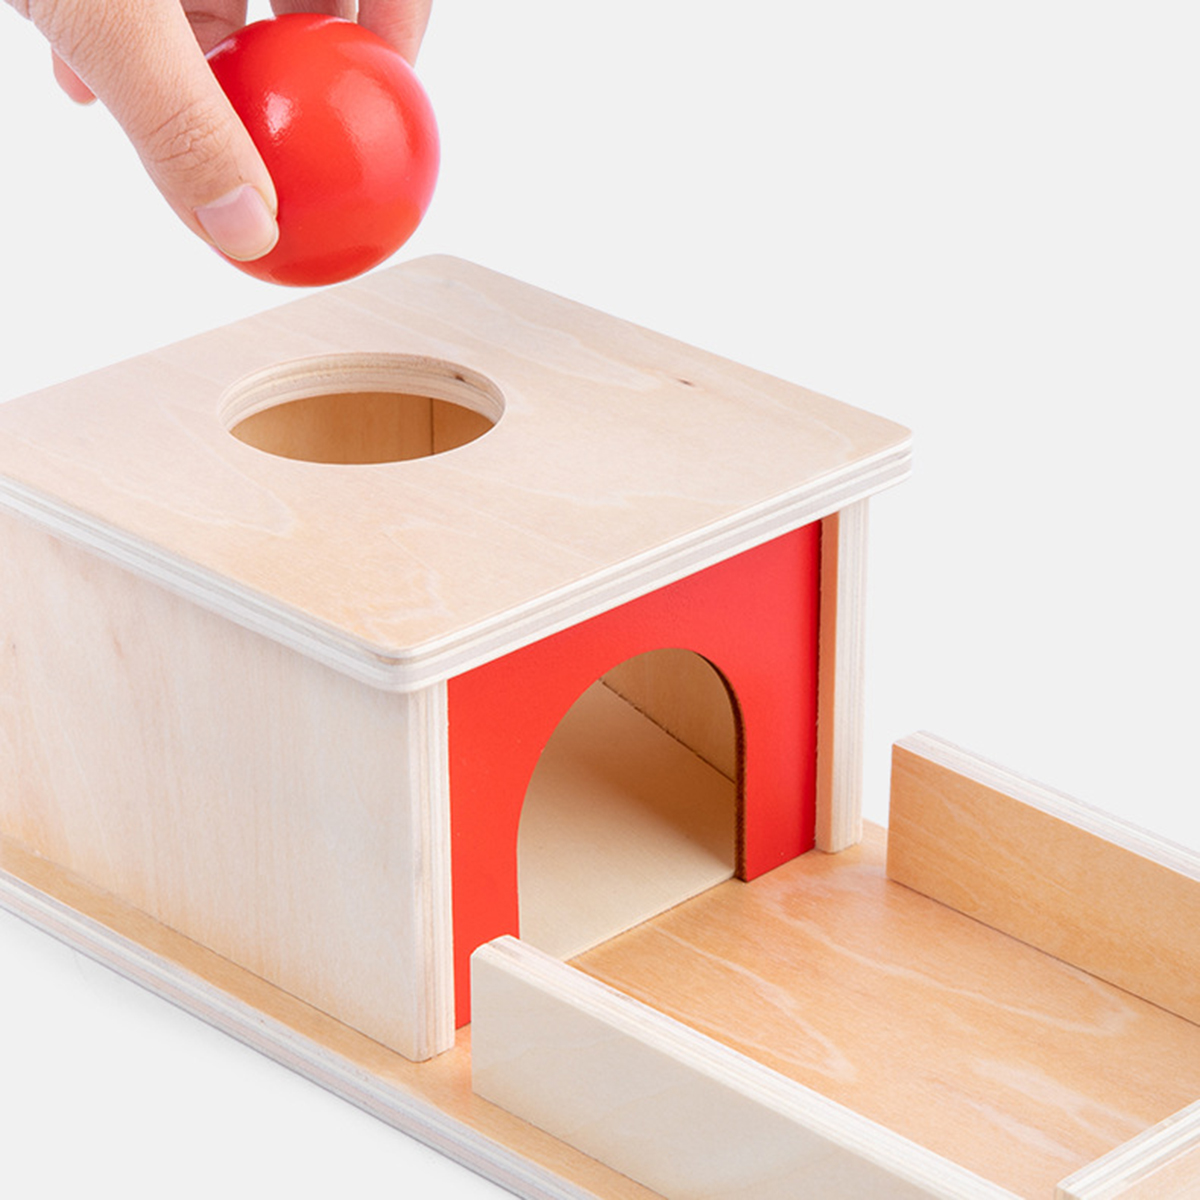 Montessori-Object-Permanence-Box-Wooden-Permanent-Box-Practical-Learning-Educational-Toy-for-Kids-Gi-1773227-5